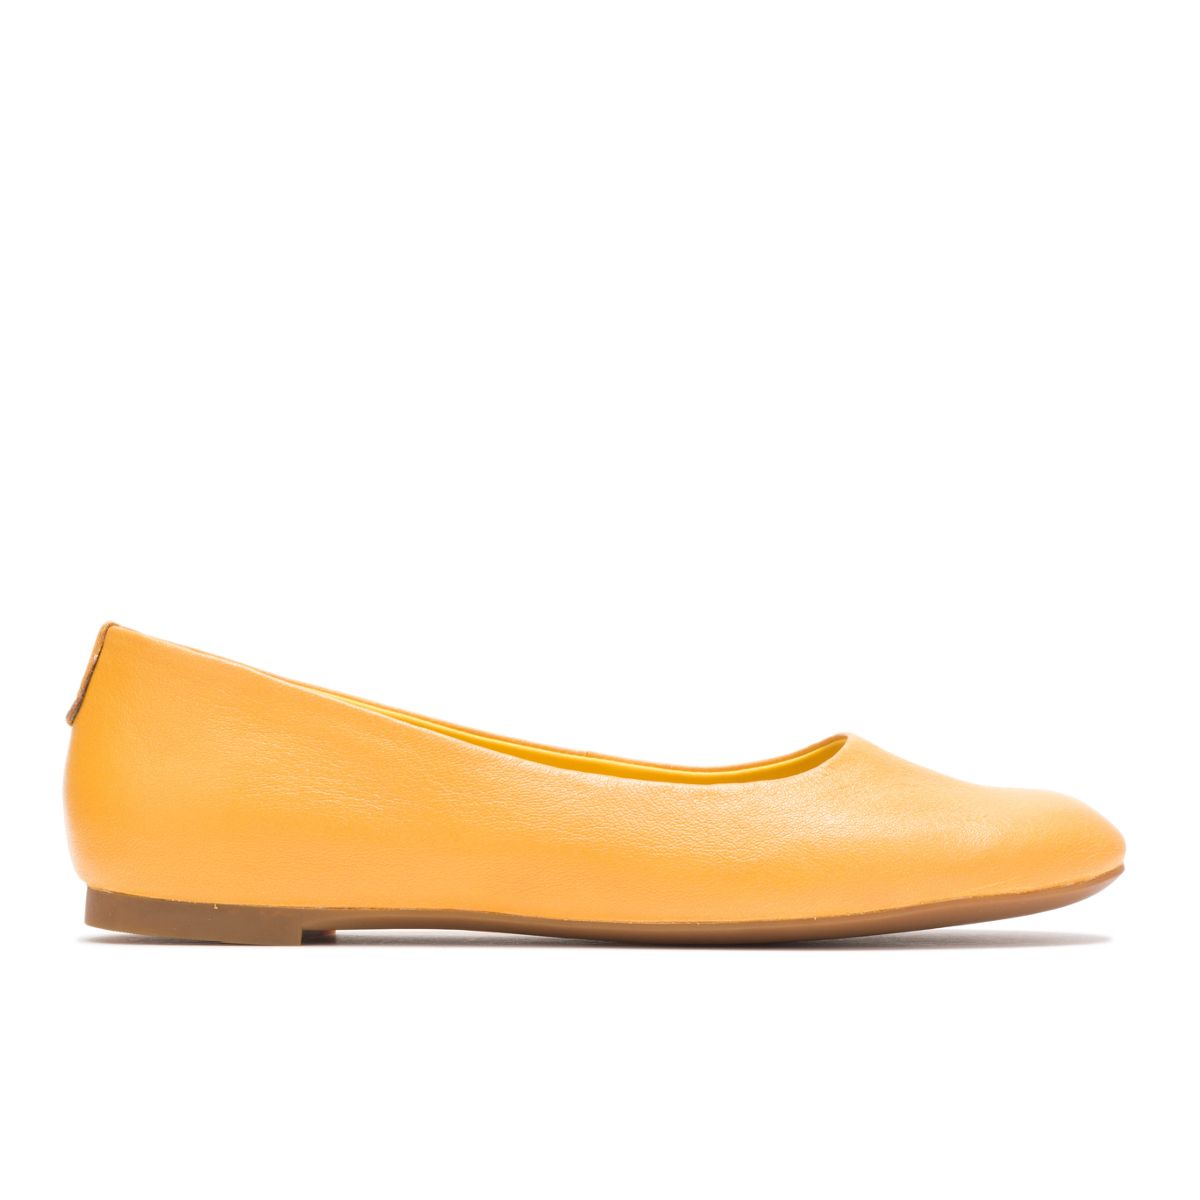 yellow leather flats womens